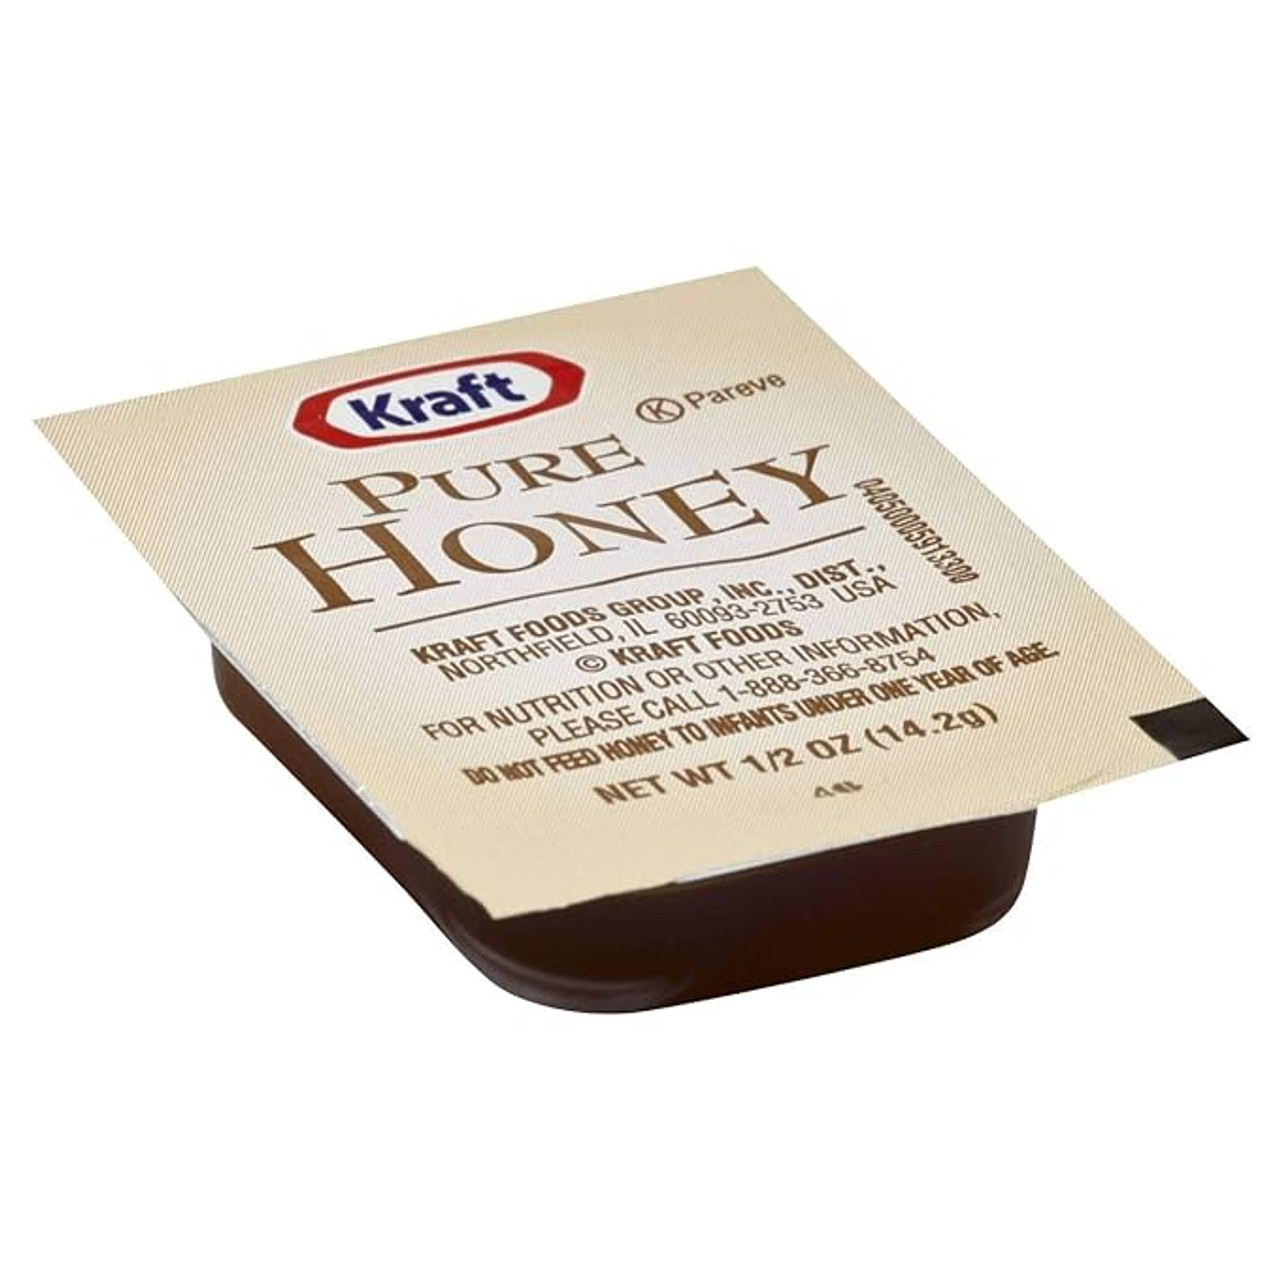 Kraft 0.5 fl. oz. Pure Honey Cup - 200/Case - Disposable Portion Packs of Pure - Chicken Pieces